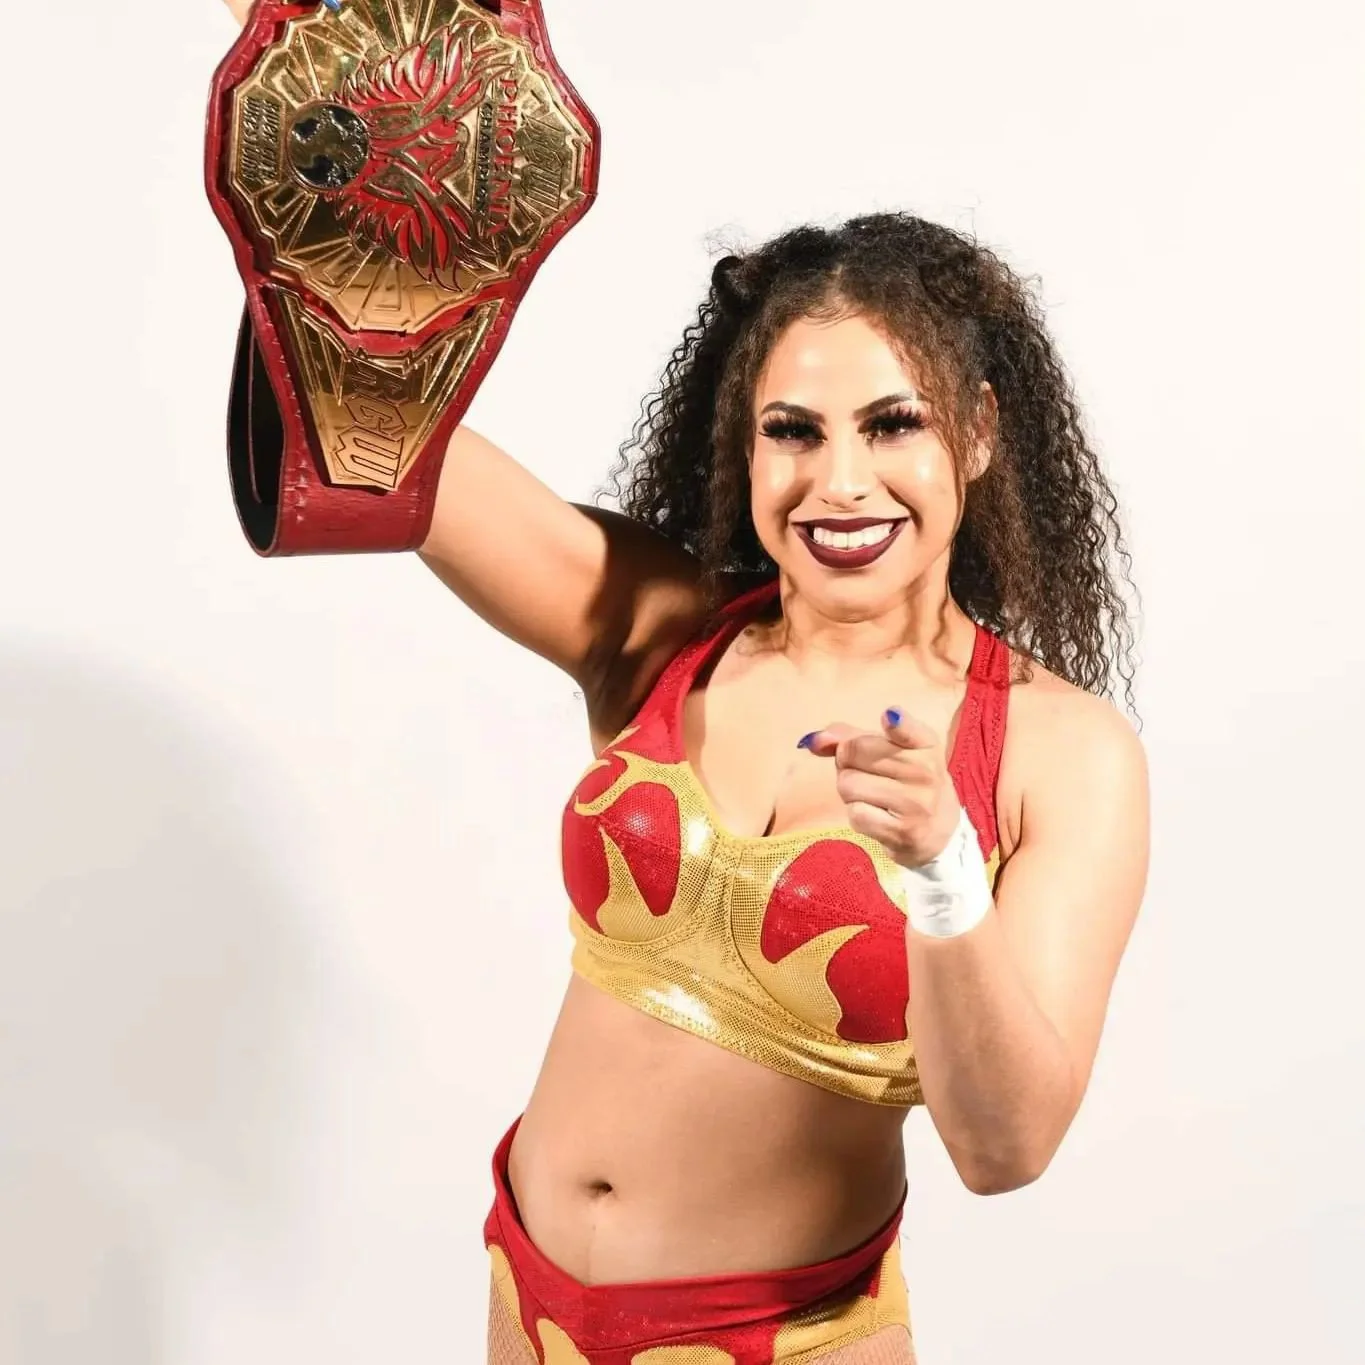 Watch the Photo by Ruinedcarpet with the username @Ruinedcarpet, posted on March 15, 2024. The post is about the topic Women of wrestling. and the text says 'Alejandra Lion.

#AlejandraLion #Latina #ProWrestler #Brunette #Beauty #Clothed #WrestlingGear #Smile #WomensWrestling #ProWrestling'